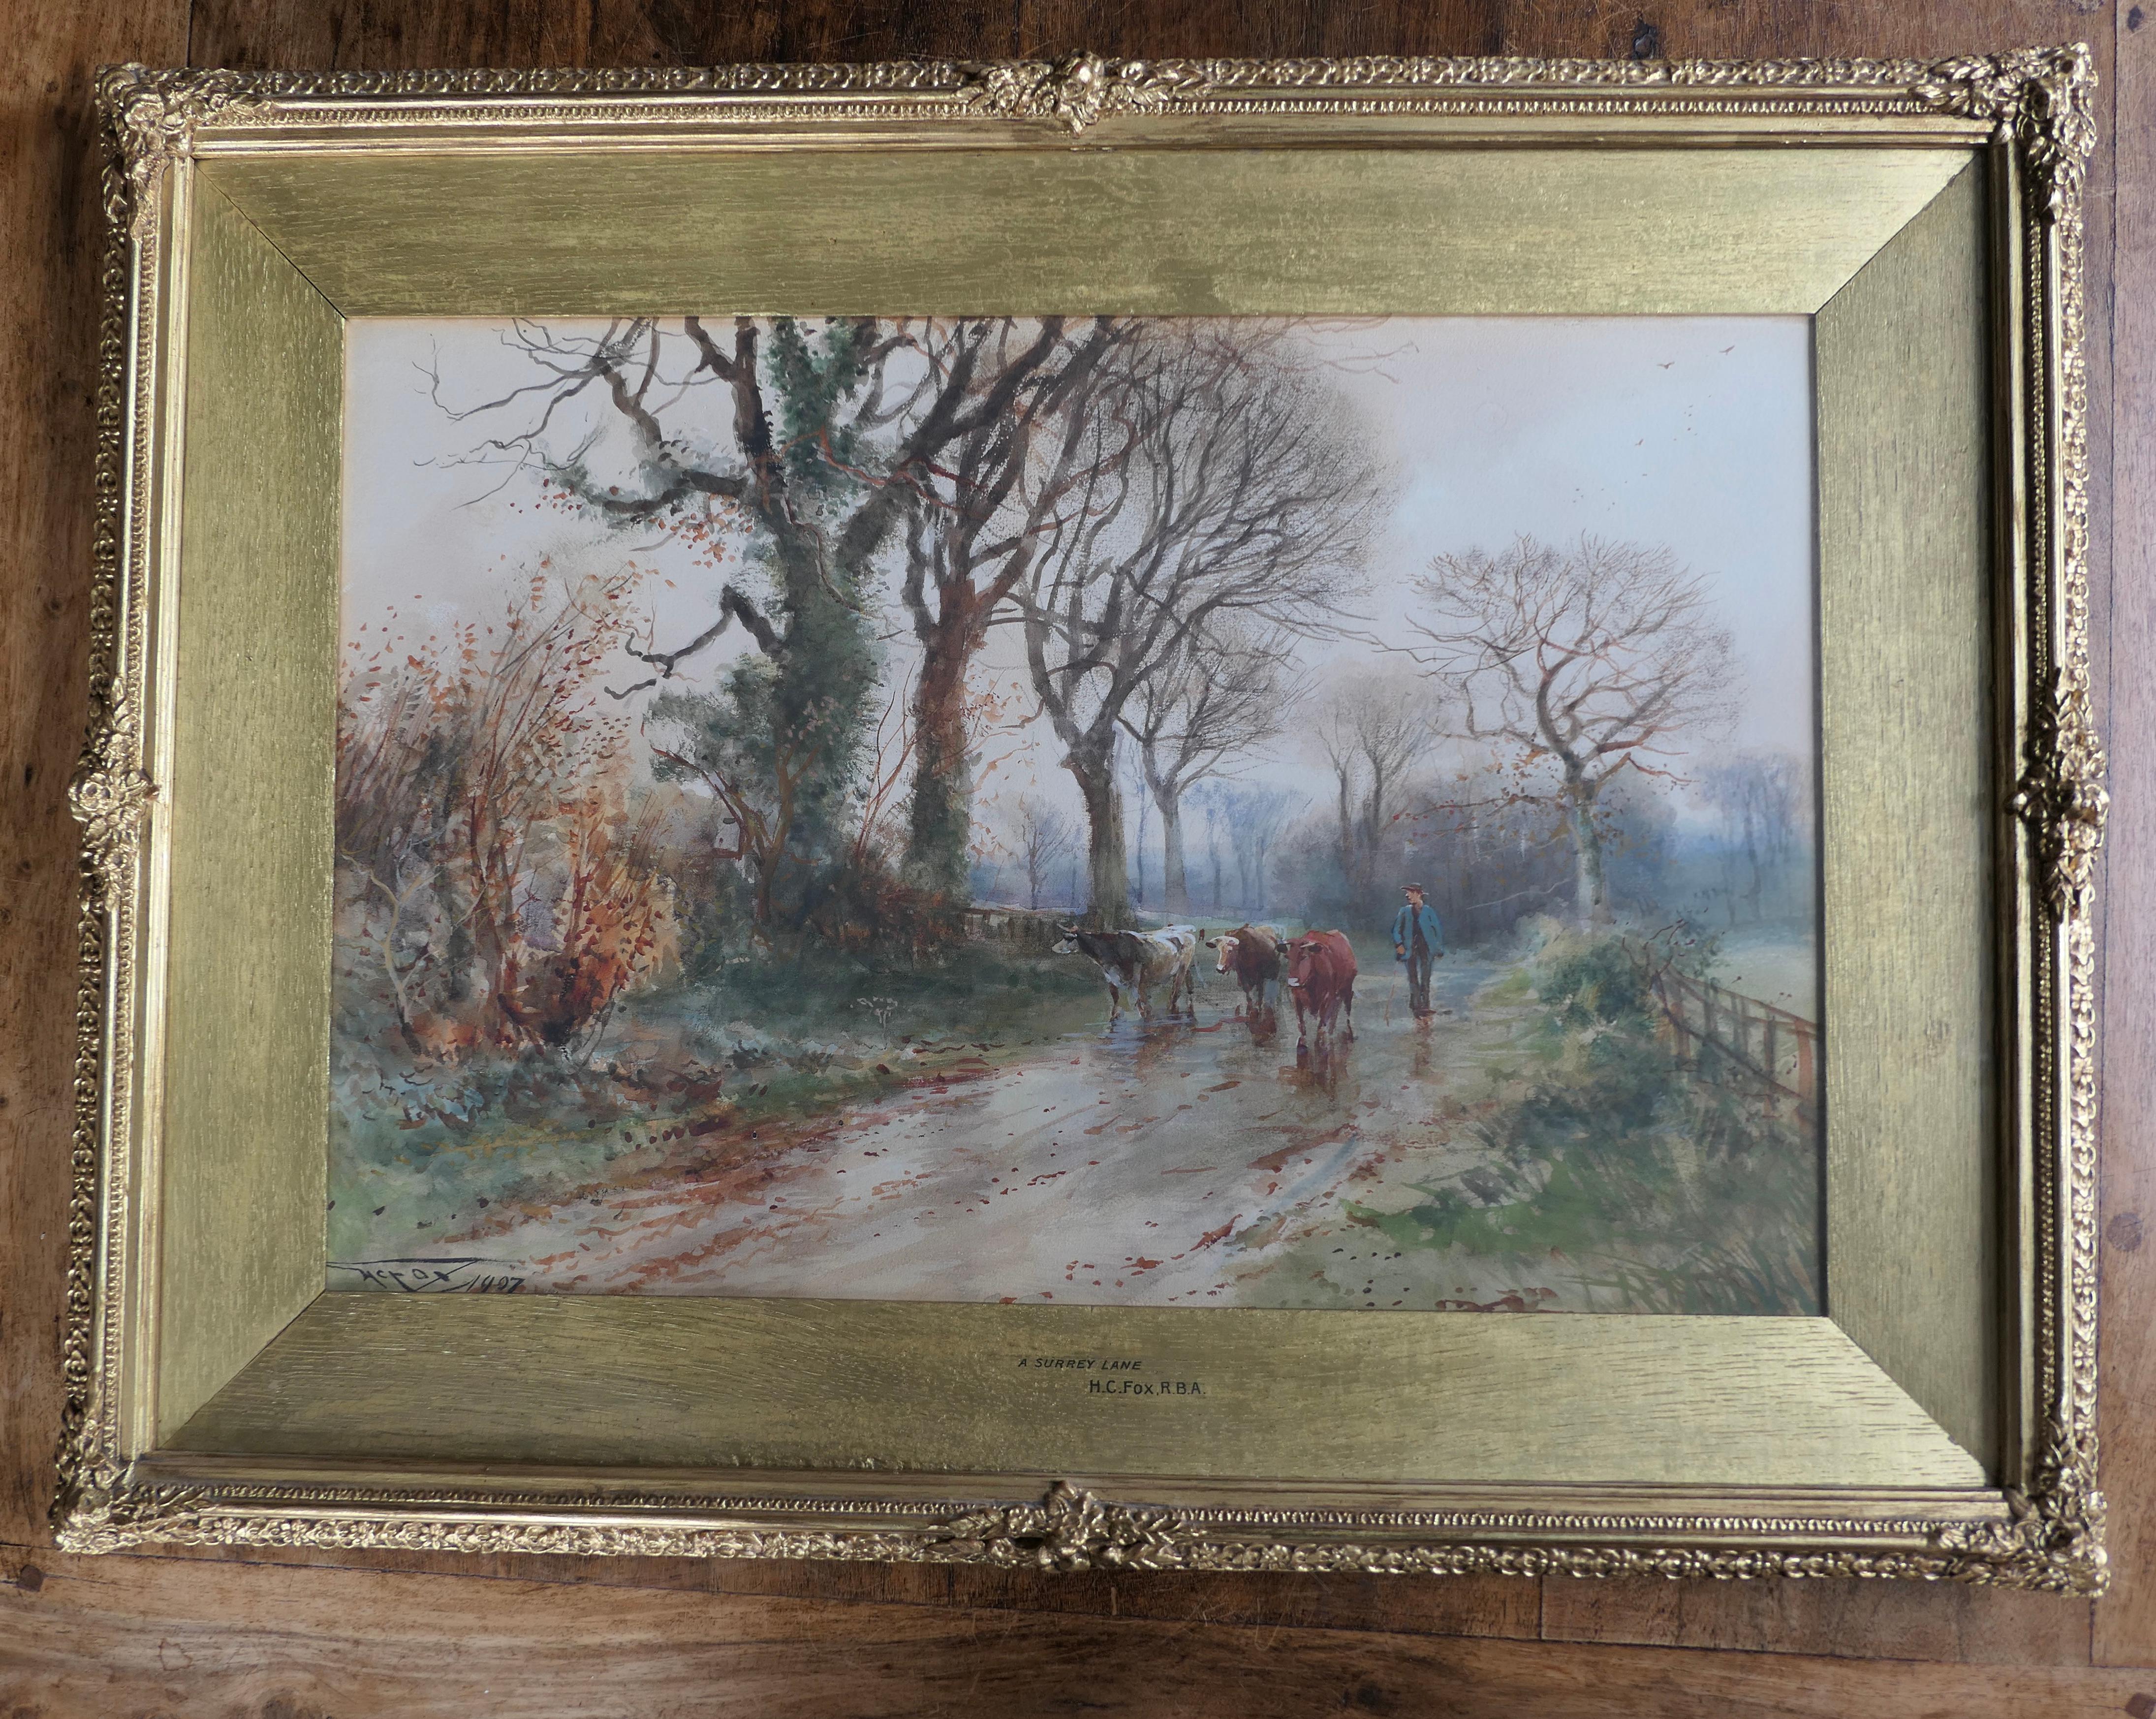 Henry Charles Fox R B A British 1855 1929. A Surrey Lane

This is a fine example of the Artists work signed and dated 1907. 
The scene is of a Cowman on a wet Surrey Lane in autumn

Fox was born in London in 1855. He exhibited at the Royal Academy